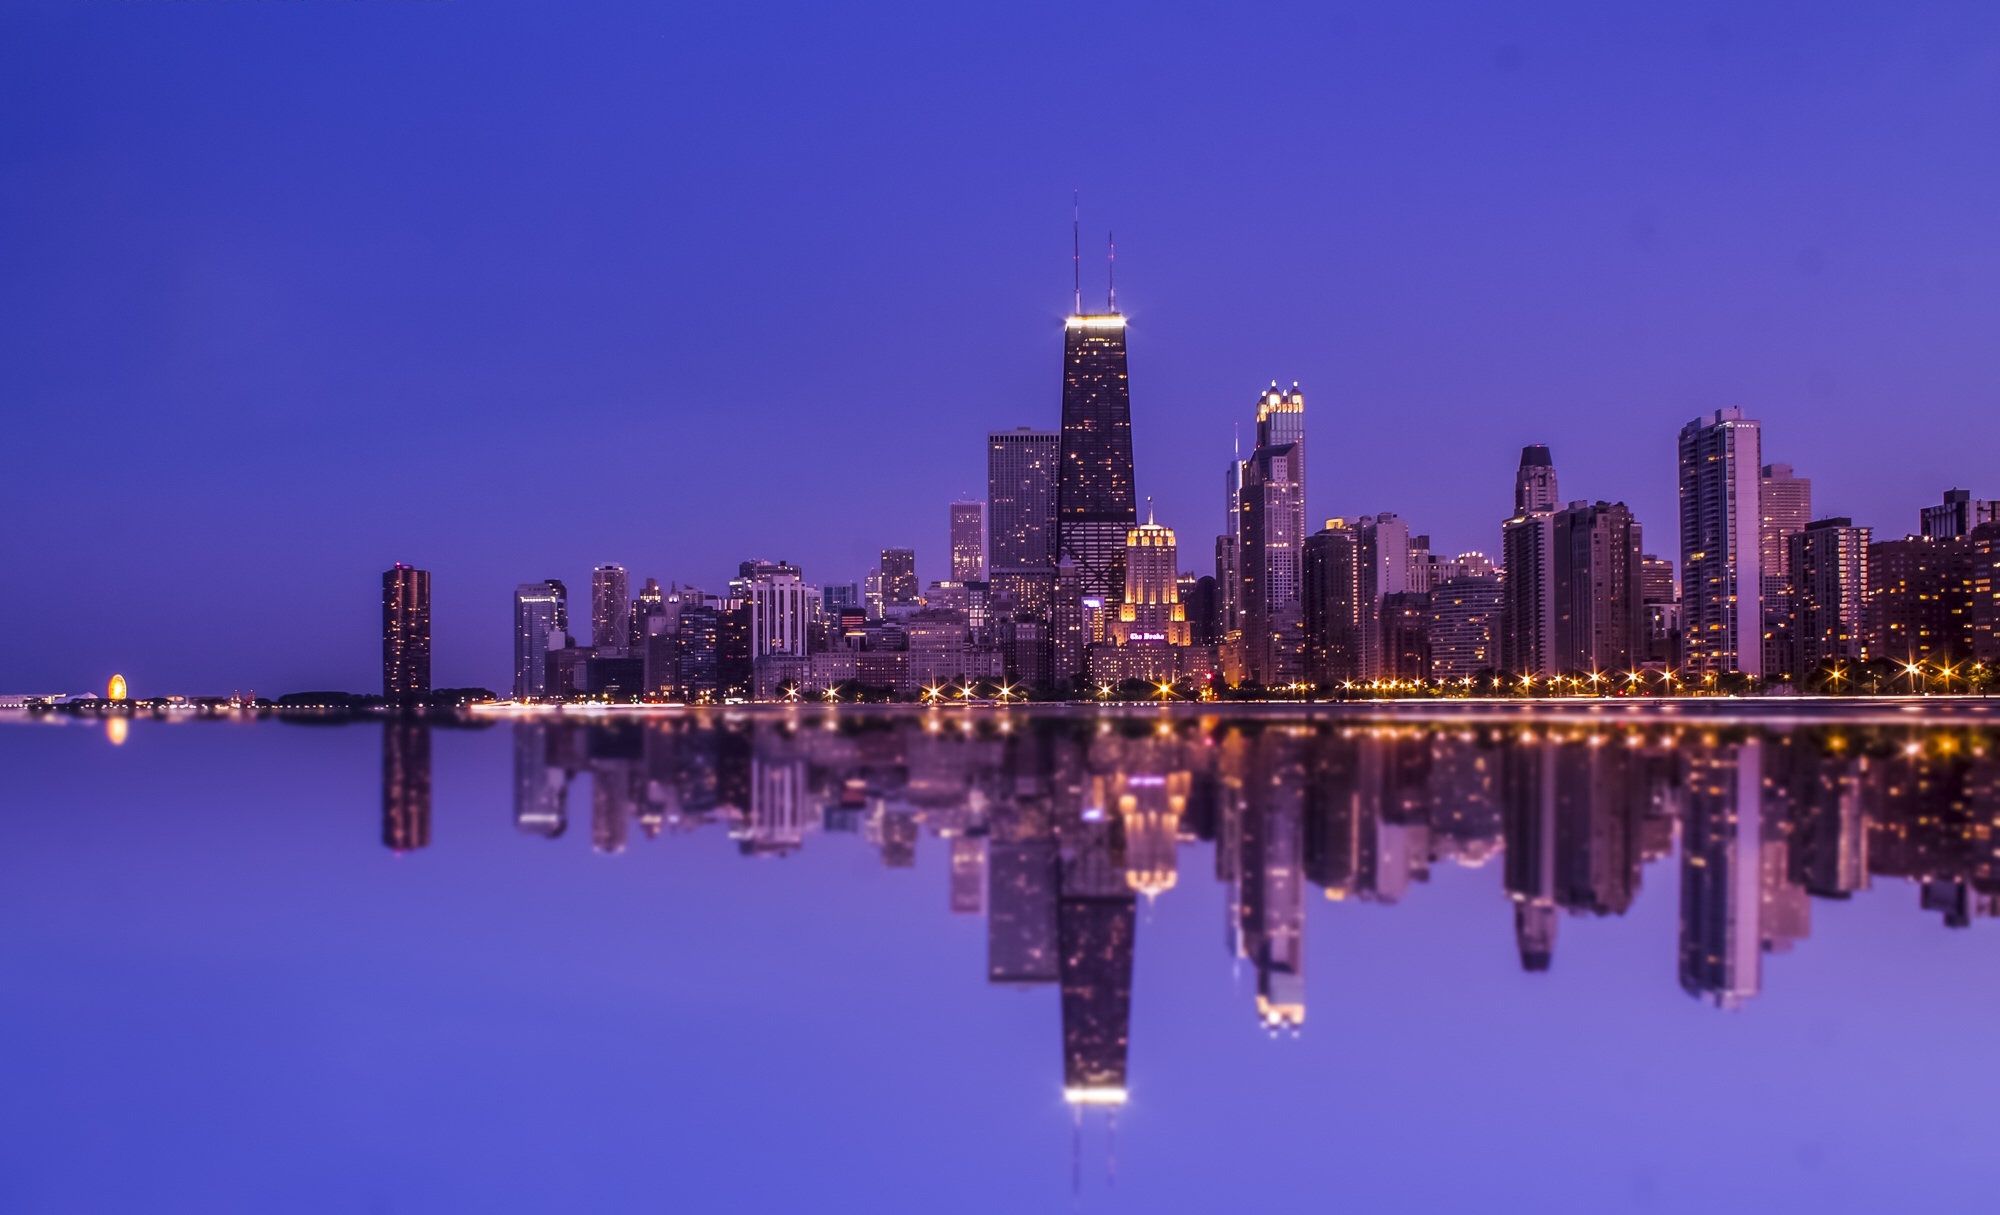 Download mobile wallpaper Cities, Night, Usa, City, Skyscraper, Building, Reflection, Chicago, Man Made for free.